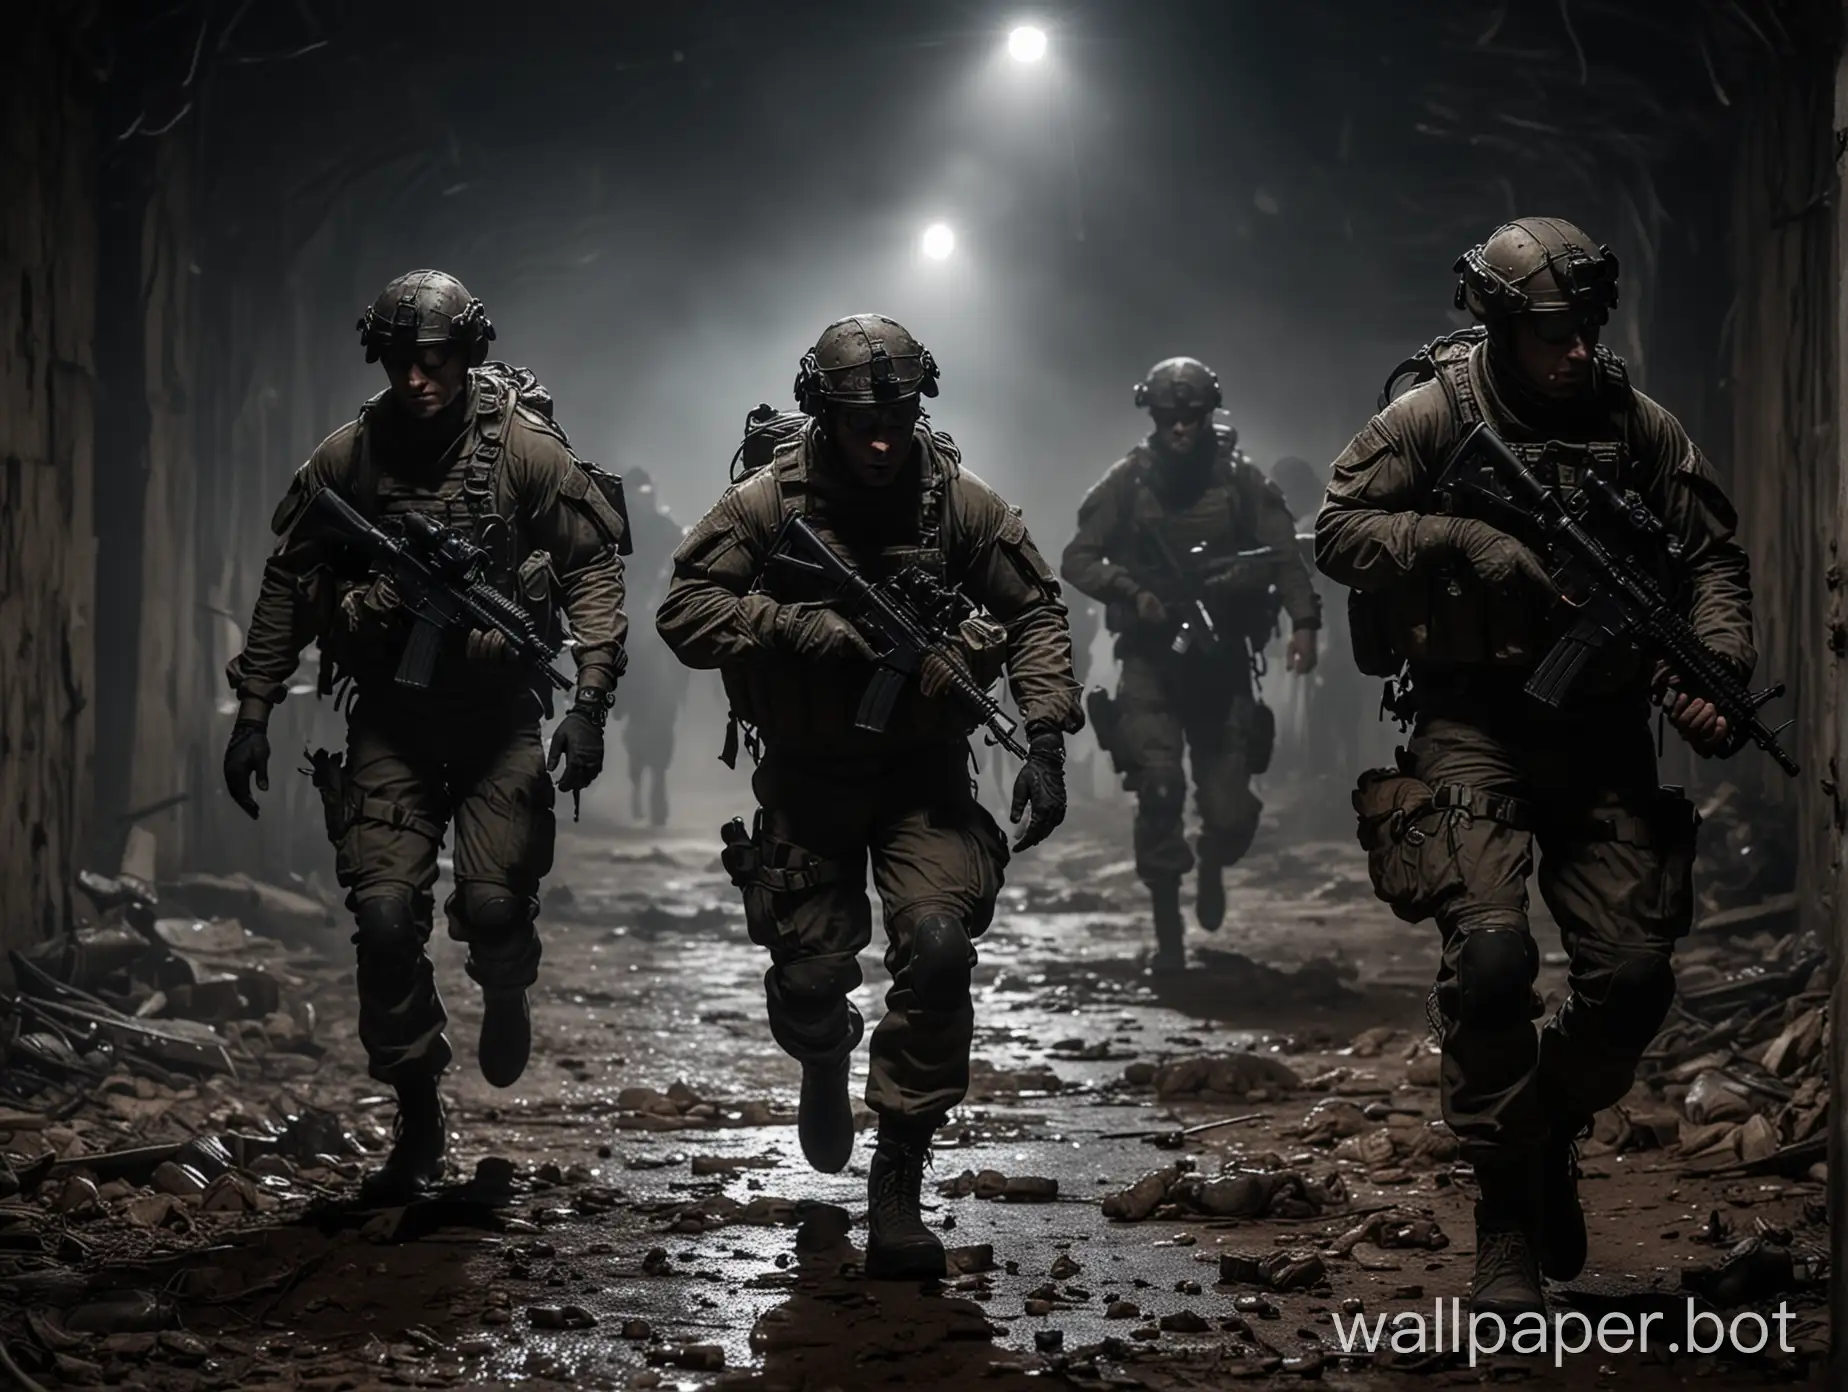 Special-Forces-Team-Maneuvering-Through-RatInfested-Darkness-with-Flashlights